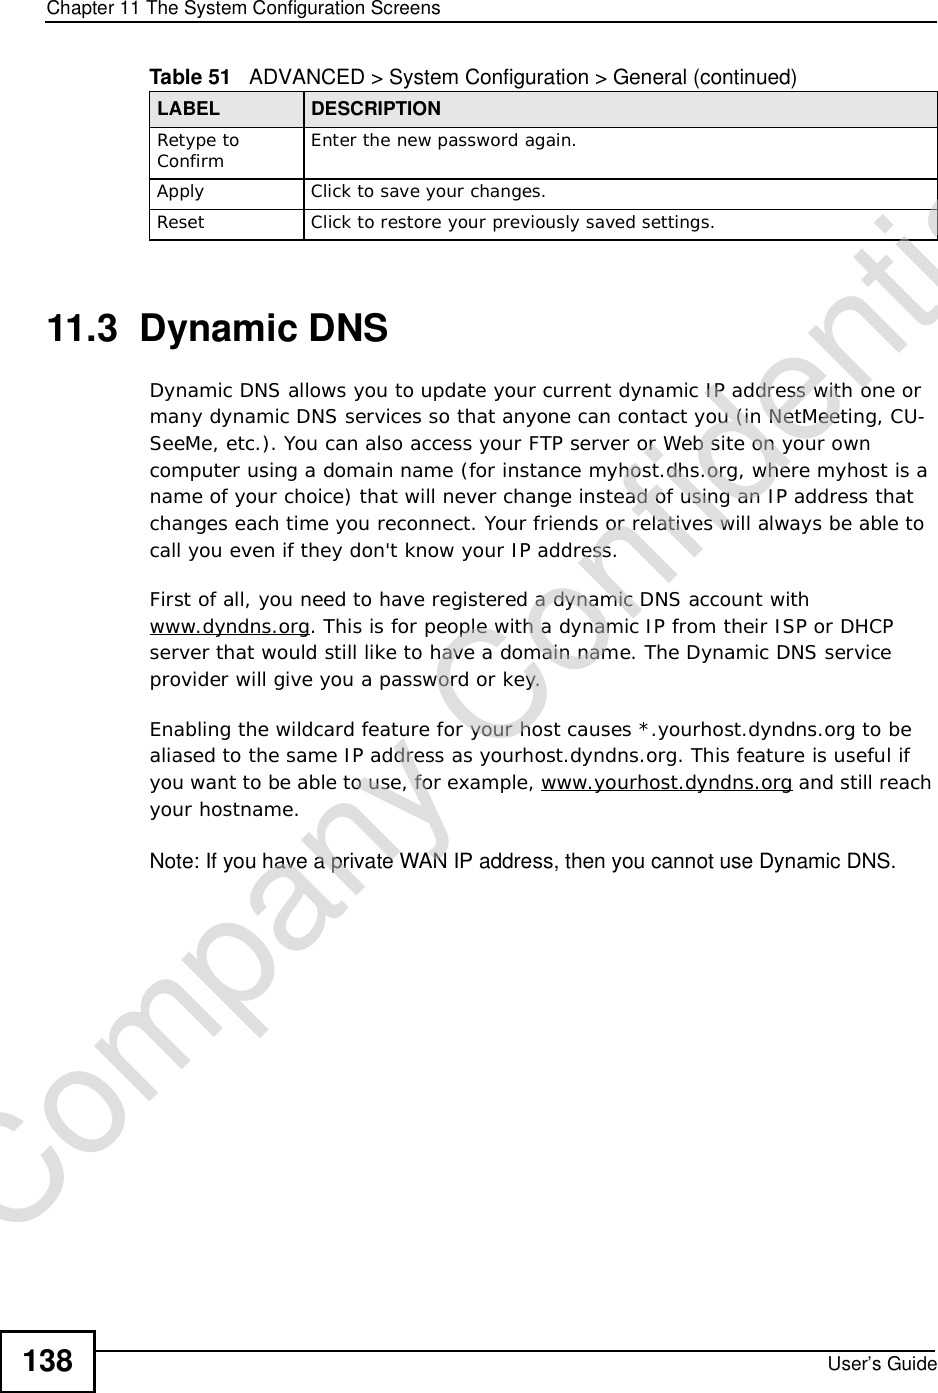 Chapter 11The System Configuration ScreensUser’s Guide13811.3  Dynamic DNSDynamic DNS allows you to update your current dynamic IP address with one or many dynamic DNS services so that anyone can contact you (in NetMeeting, CU-SeeMe, etc.). You can also access your FTP server or Web site on your own computer using a domain name (for instance myhost.dhs.org, where myhost is a name of your choice) that will never change instead of using an IP address that changes each time you reconnect. Your friends or relatives will always be able to call you even if they don&apos;t know your IP address.First of all, you need to have registered a dynamic DNS account with www.dyndns.org. This is for people with a dynamic IP from their ISP or DHCP server that would still like to have a domain name. The Dynamic DNS service provider will give you a password or key.Enabling the wildcard feature for your host causes *.yourhost.dyndns.org to be aliased to the same IP address as yourhost.dyndns.org. This feature is useful if you want to be able to use, for example, www.yourhost.dyndns.org and still reach your hostname.Note: If you have a private WAN IP address, then you cannot use Dynamic DNS.Retype to Confirm Enter the new password again.ApplyClick to save your changes.ResetClick to restore your previously saved settings.Table 51   ADVANCED &gt; System Configuration &gt; General (continued)LABEL DESCRIPTIONCompany Confidential